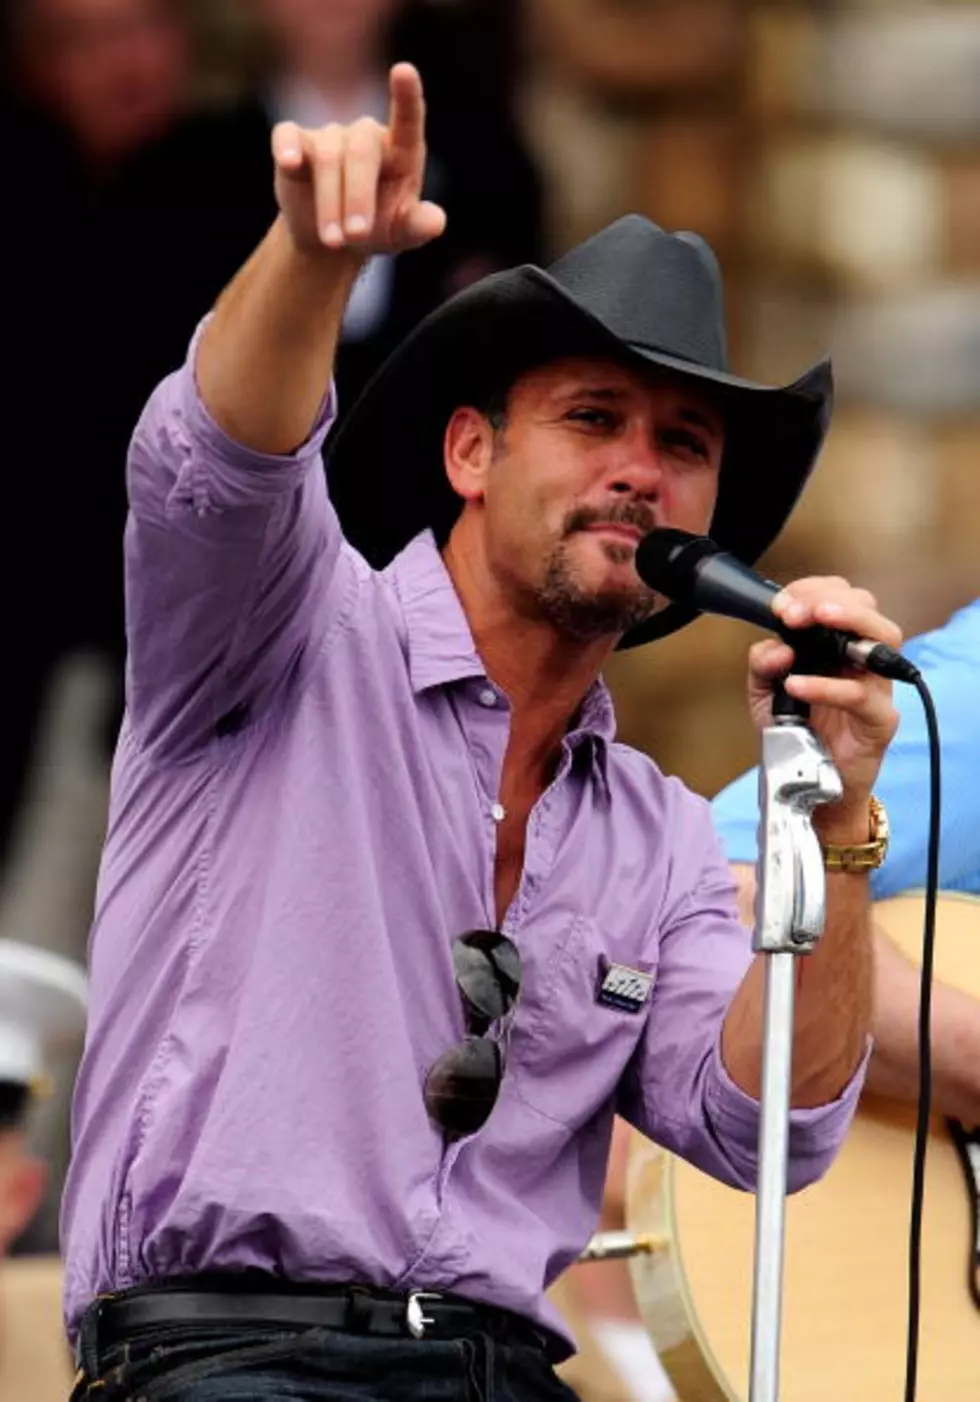 Tim McGraw&#8217;s New Song Battles Brantley Gilbert On Today&#8217;s Clash [AUDIO]